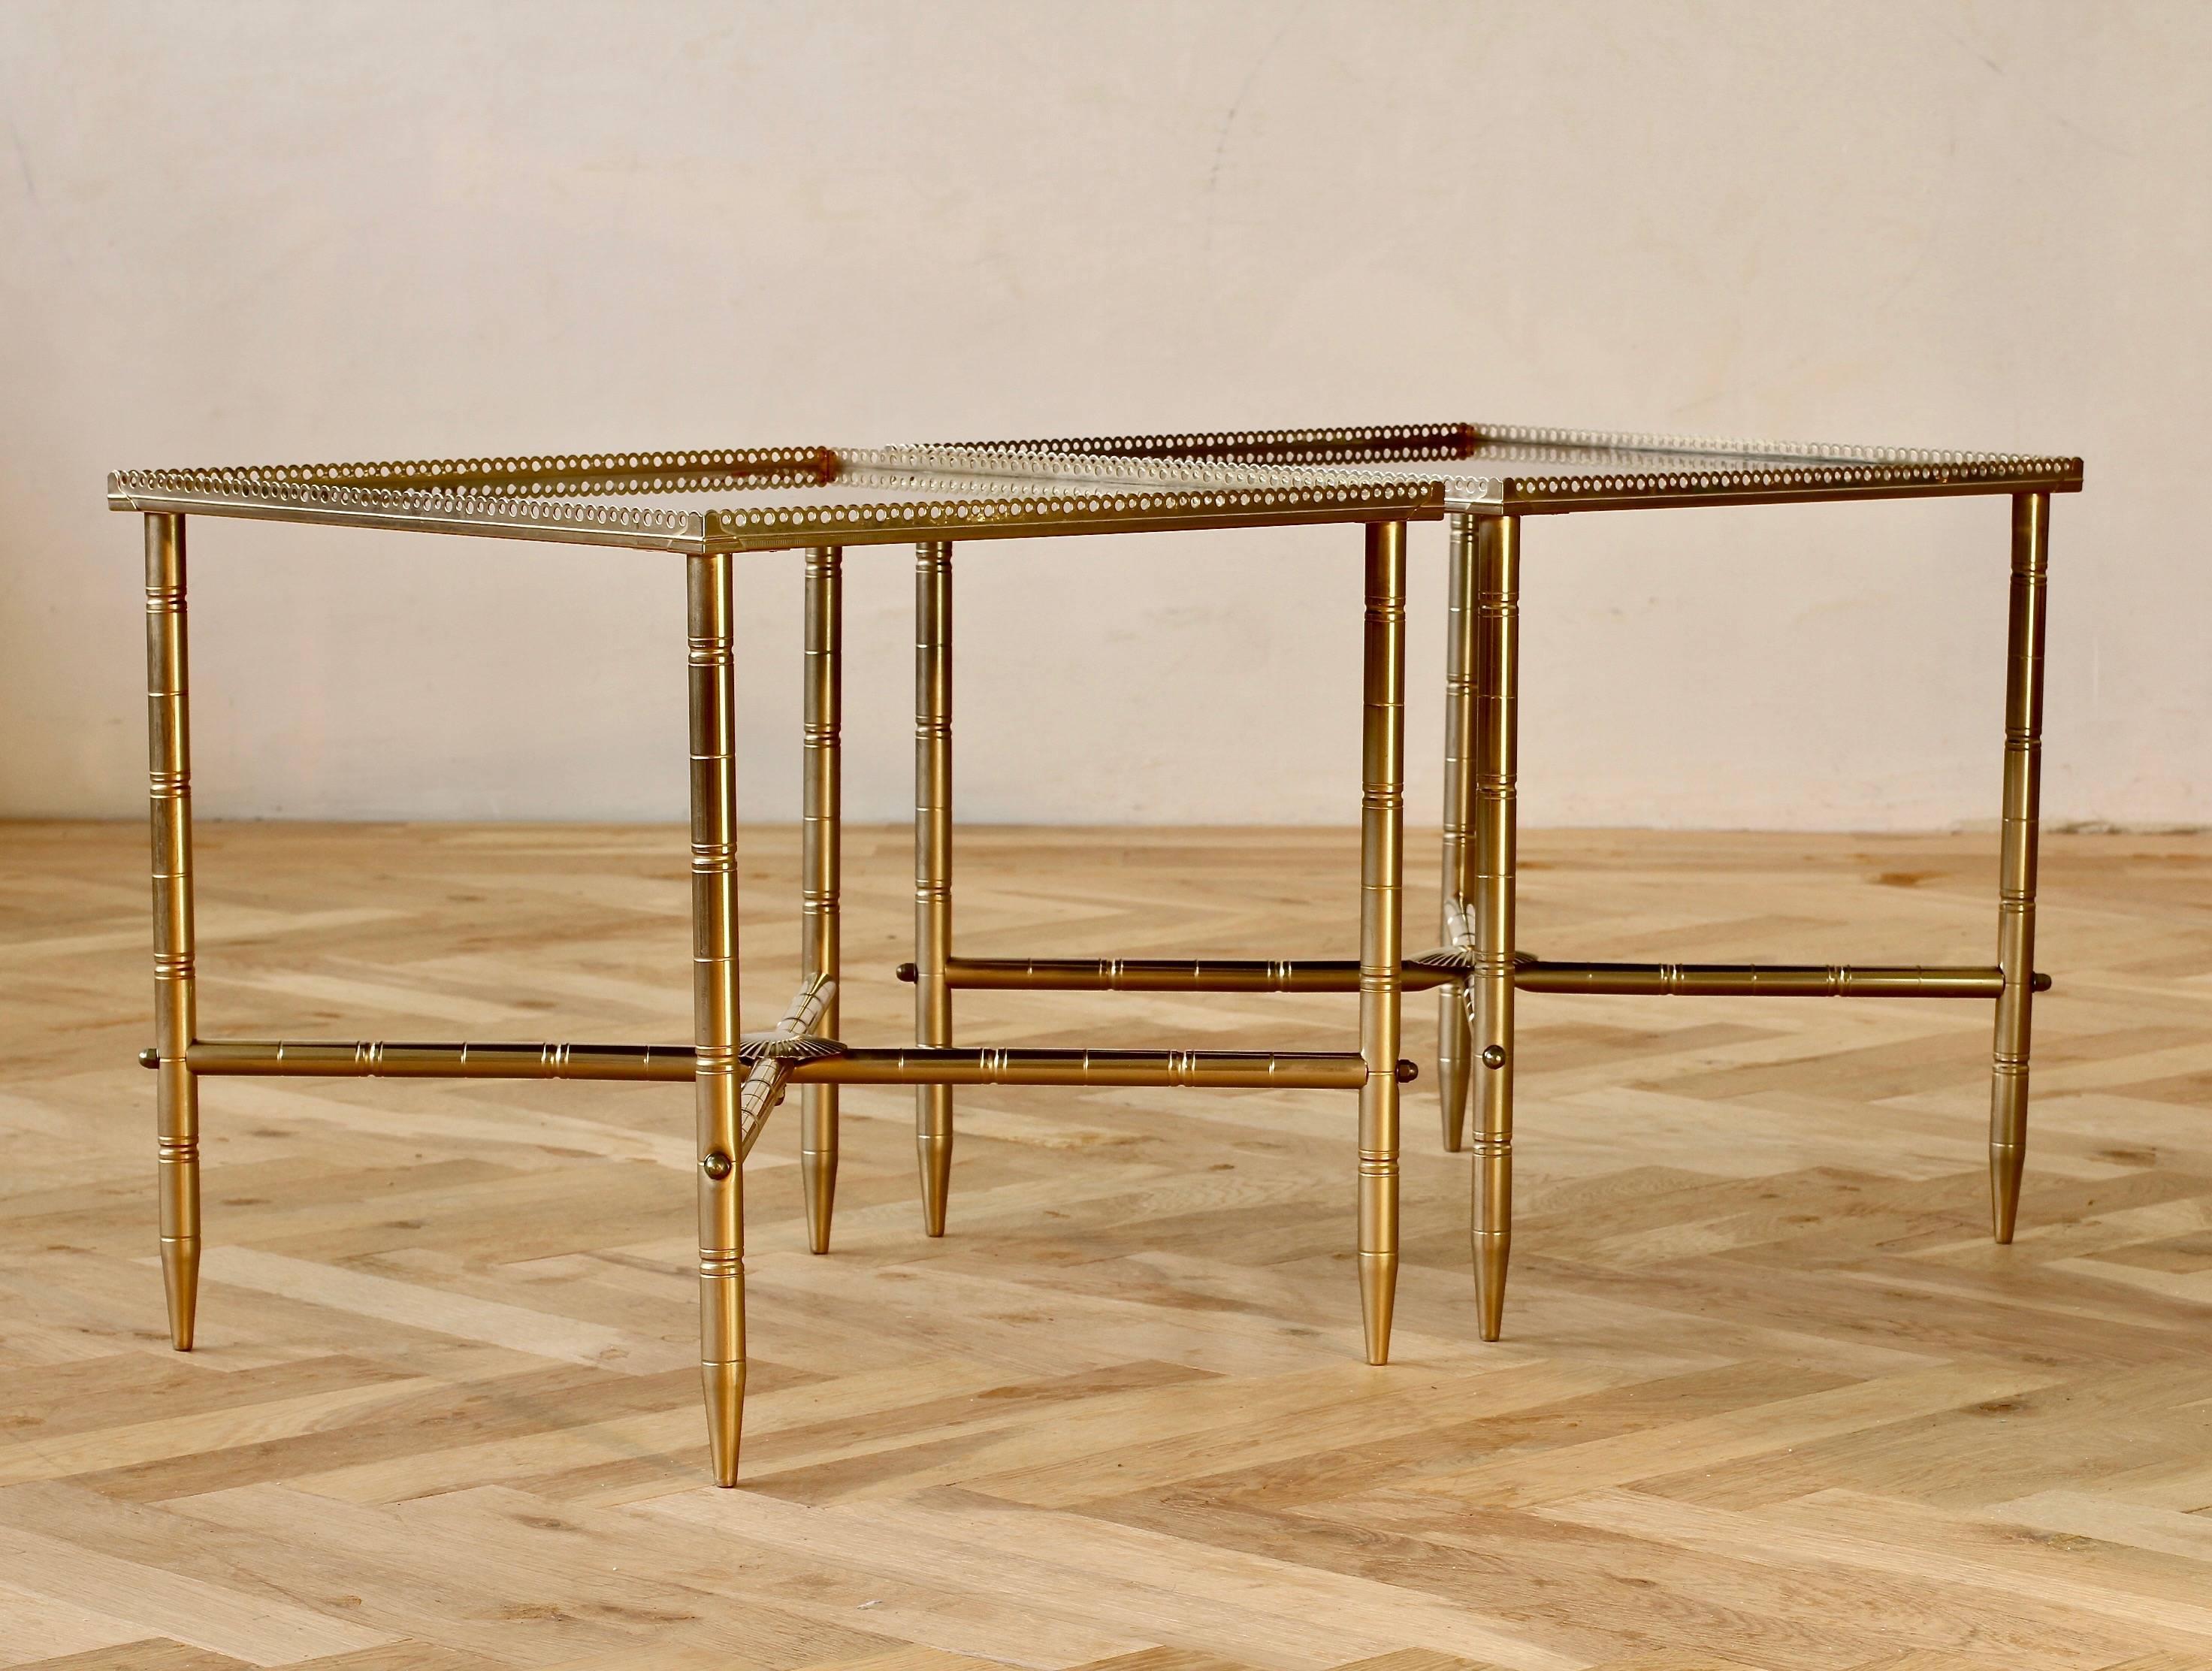 A delightful pair of vintage French midcentury side tables in the style of Maison Baguès, circa 1970s. Featuring perforated metal banding around the tabletop and 'lathed' style details on the legs and cross sections. The table tops are simply